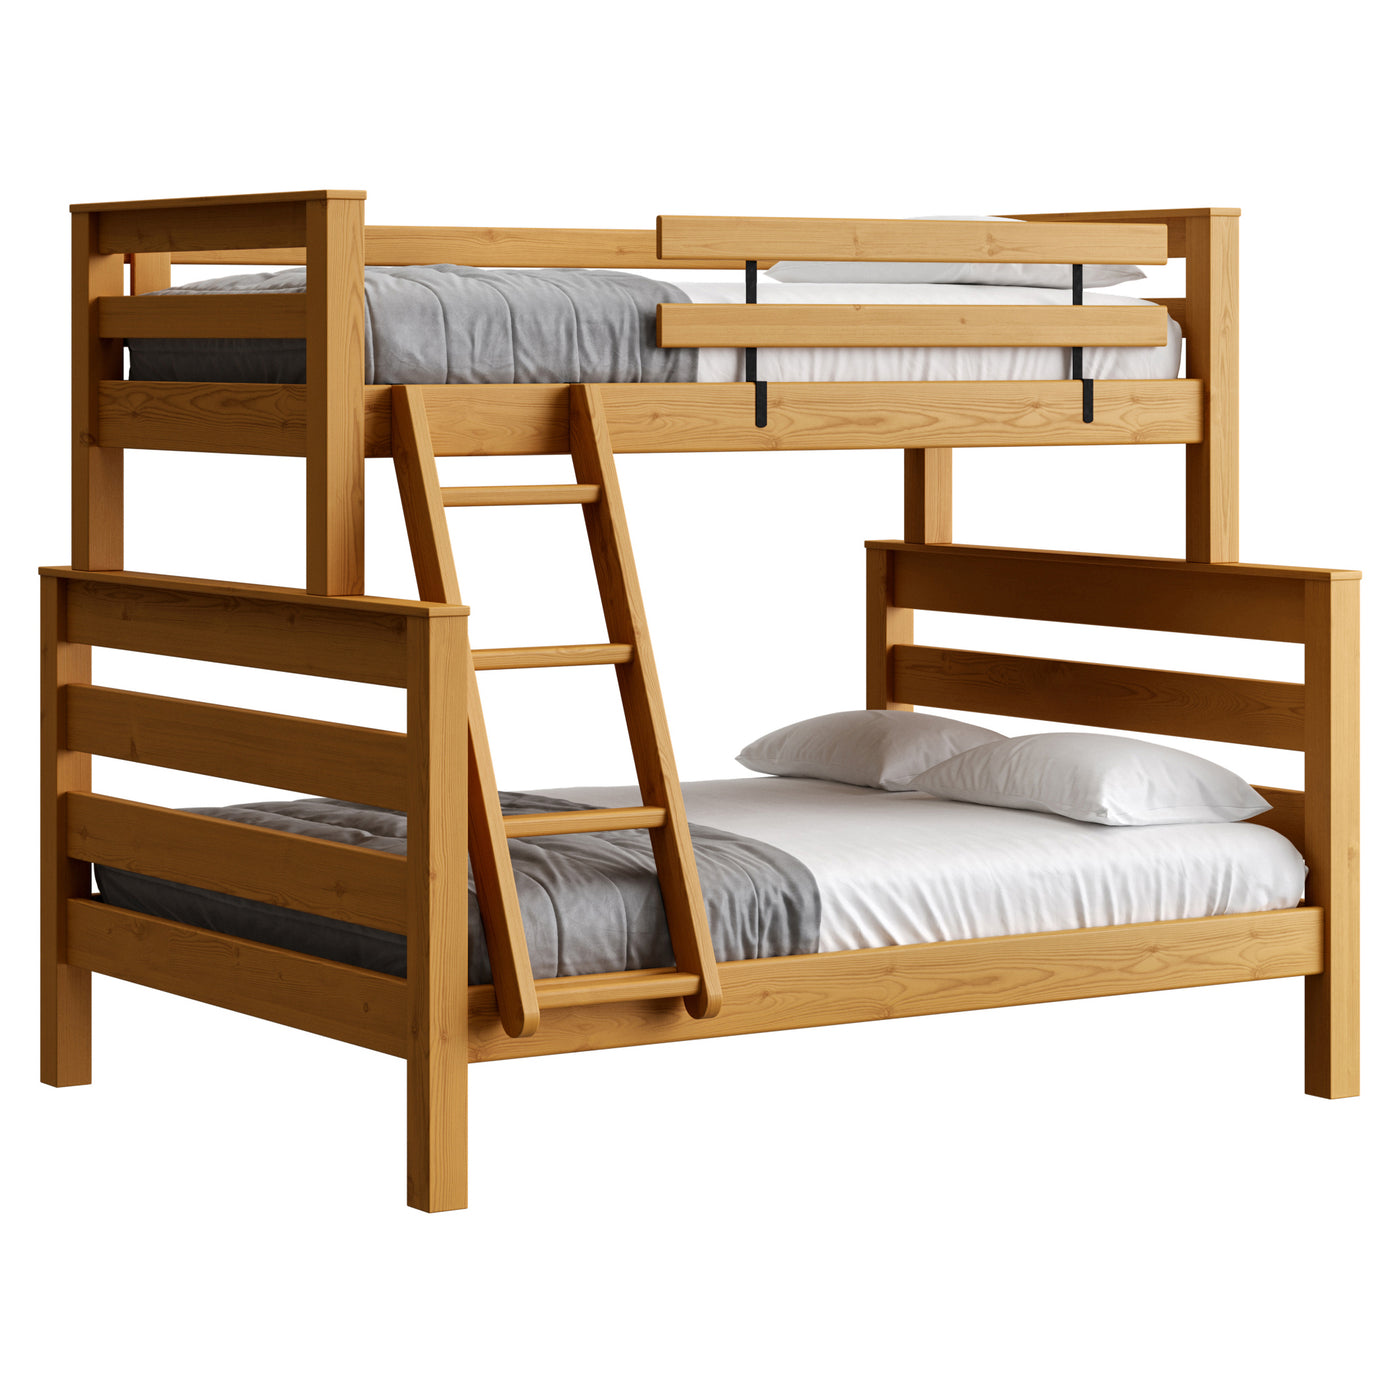 TimberFrame Bunk Bed - TwinXL Over Queen, Offset – Crate Designs Furniture